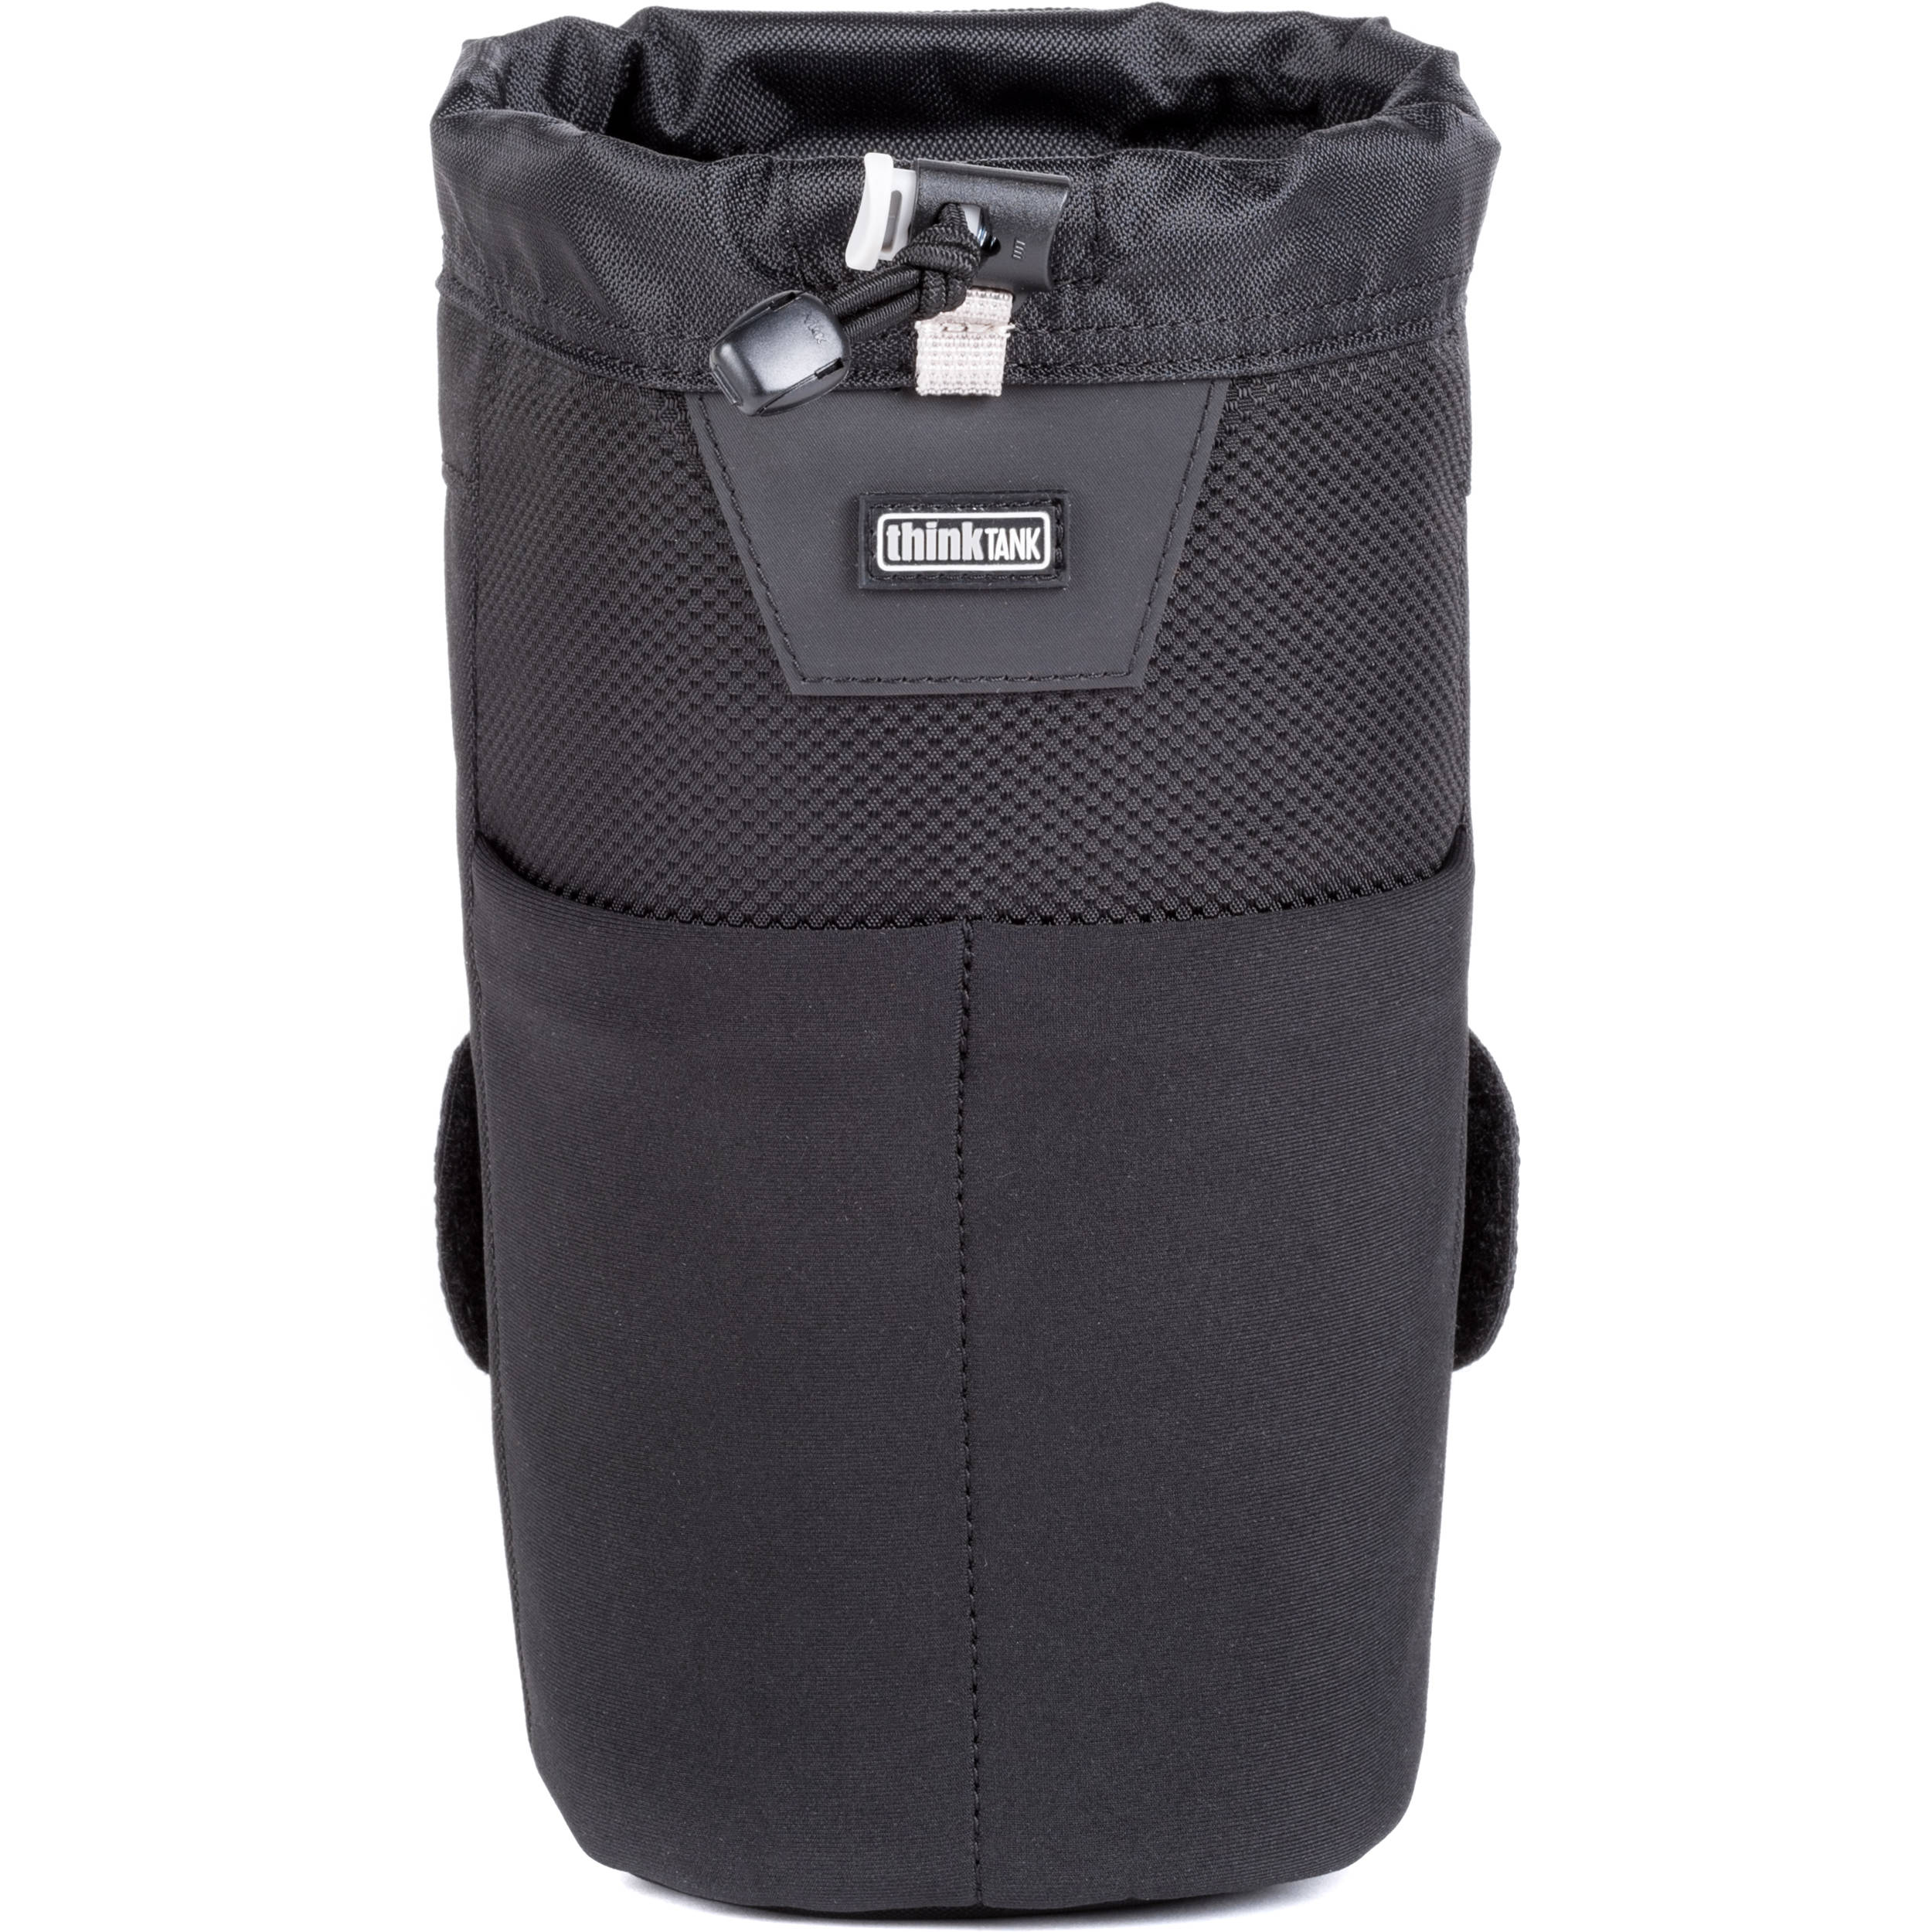 think tank filter pouch